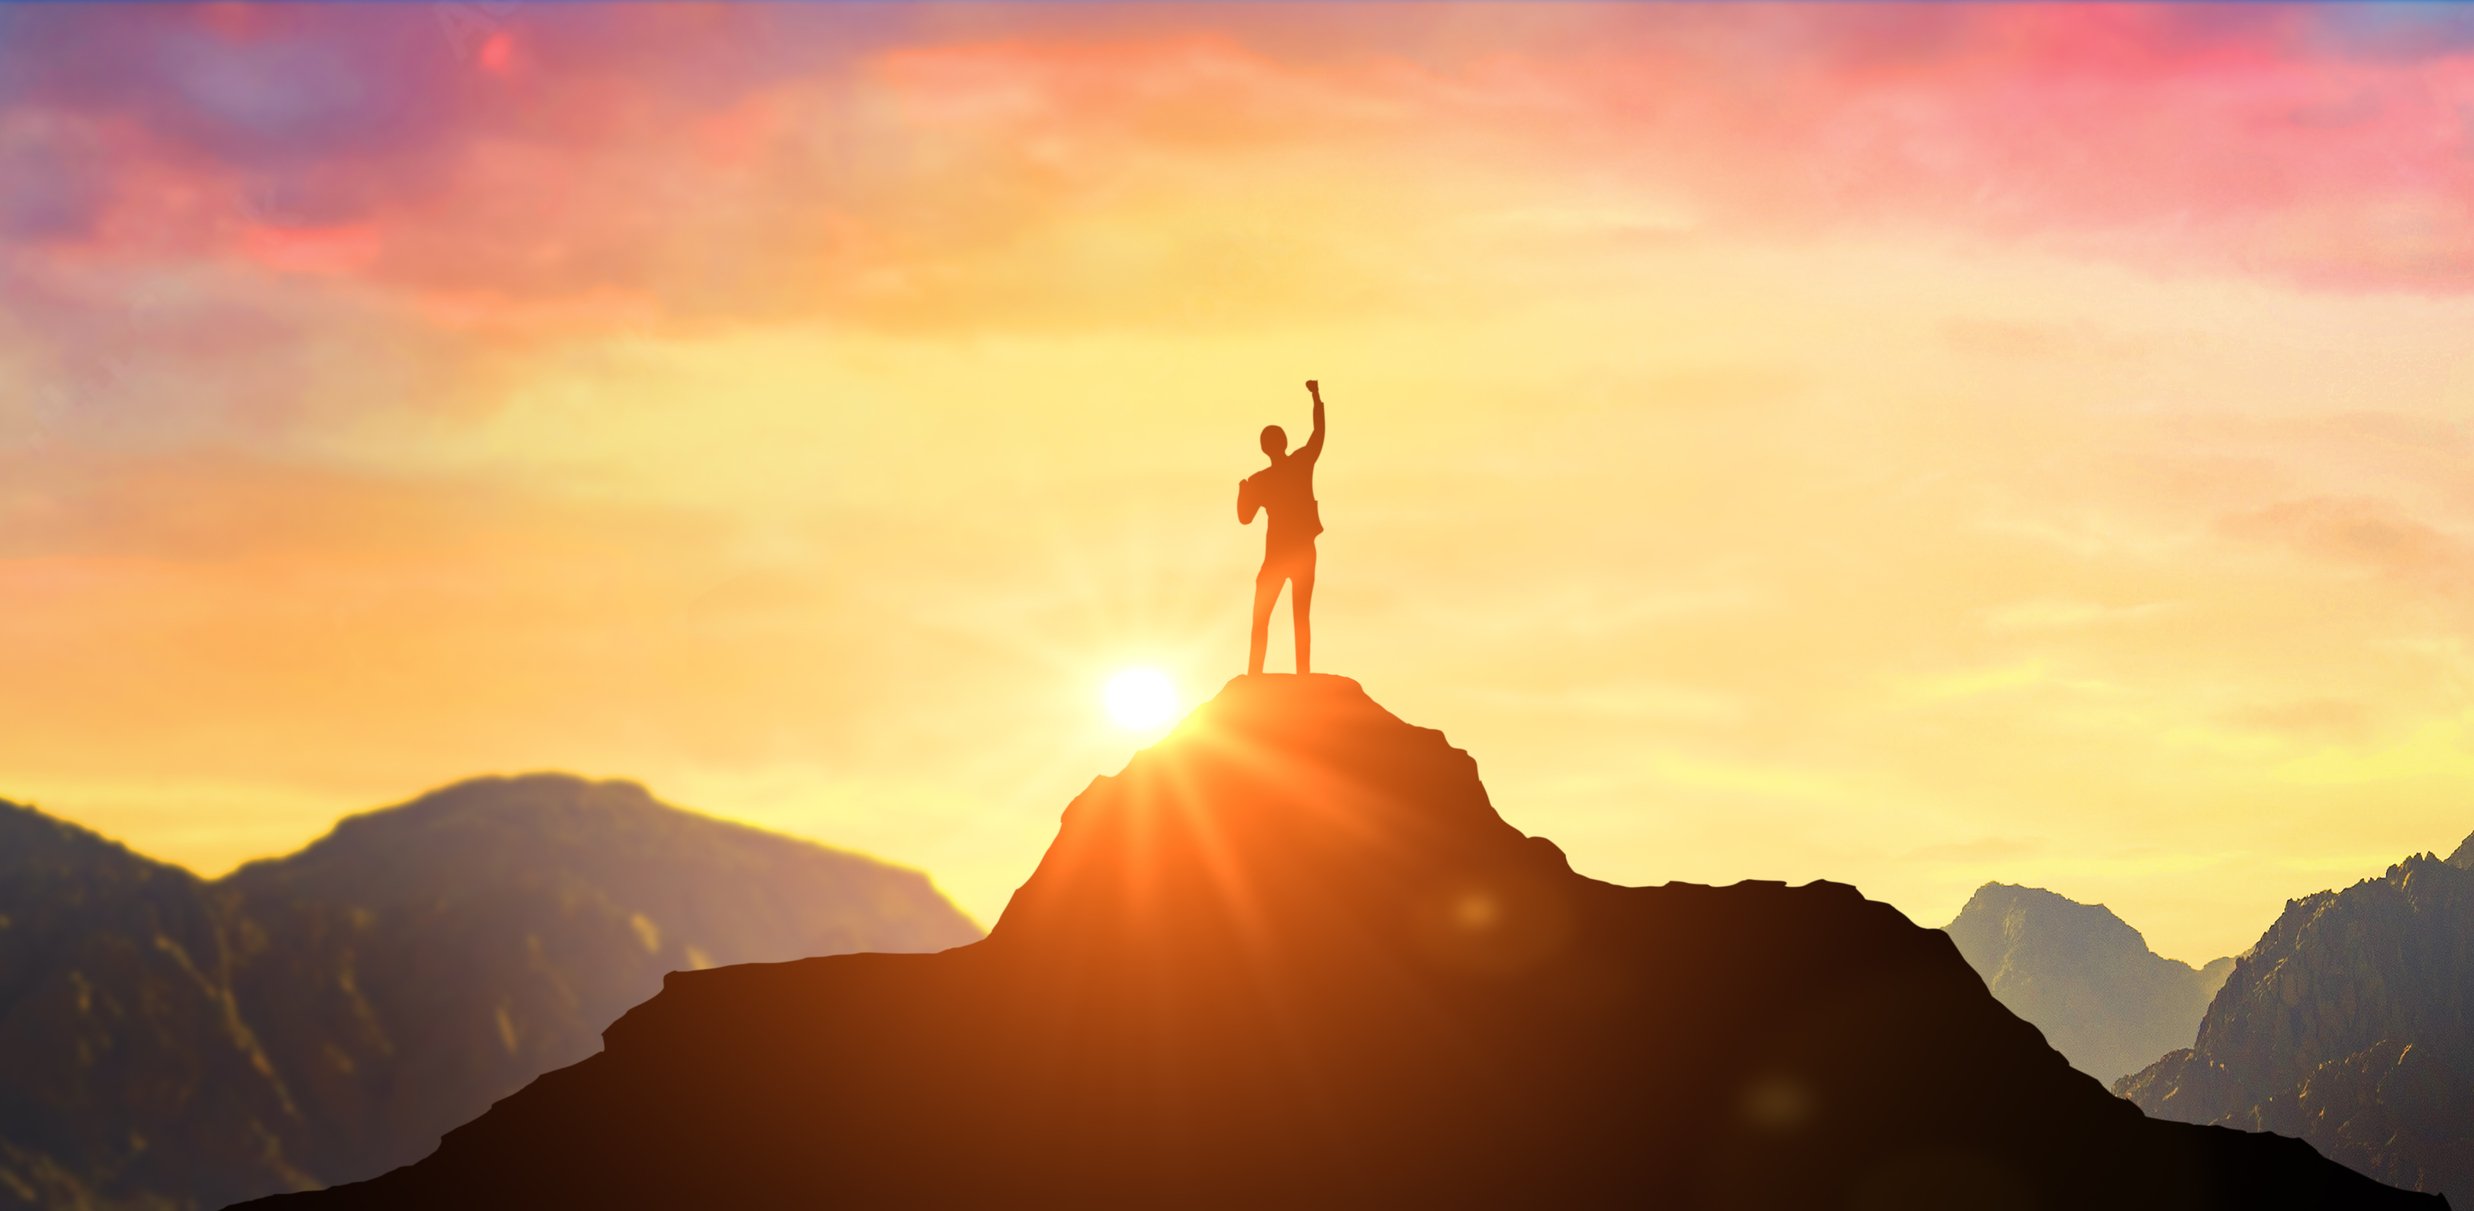 Photo of a person celebrating at the top of the mountain while the sun setsrises